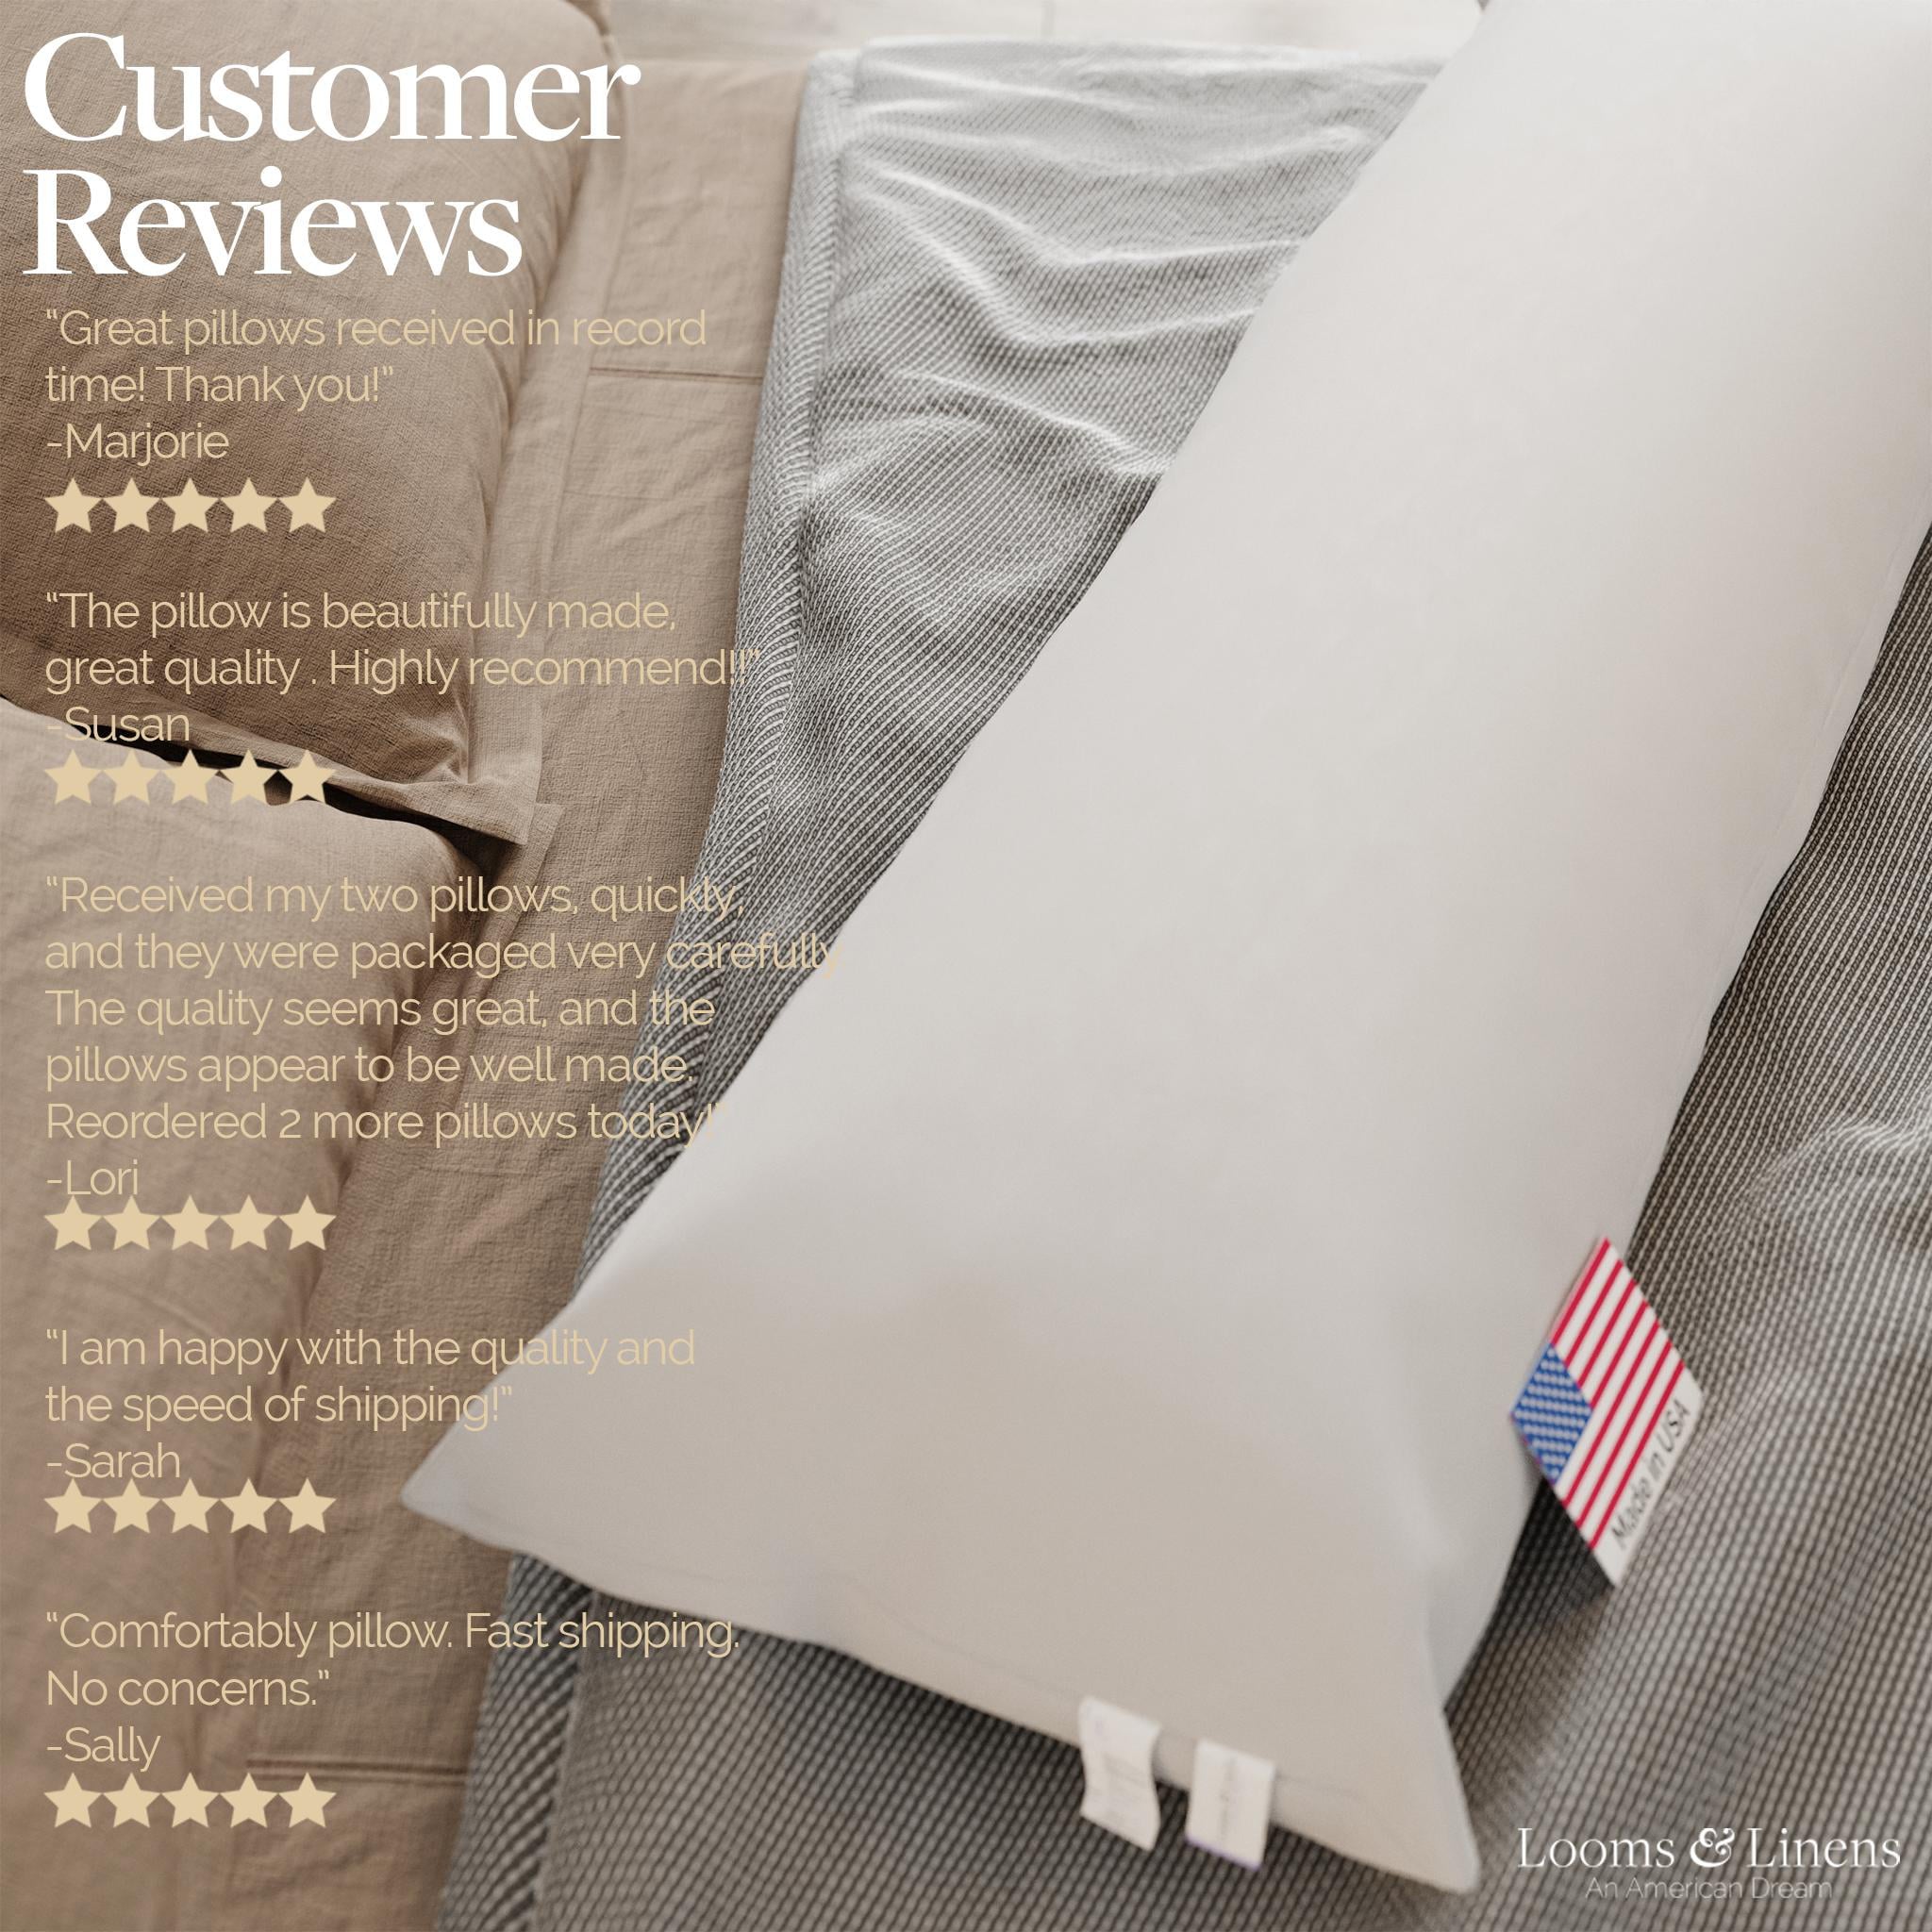 Looms & Linens Full Body Pillow for Adults Elderly and Pregnant Woman Down Alternative Plush Filling - Long Pillow Posture and Spine Support for Rem Sleep Pillow Extra Large 20 x 72 inch 1 Pack